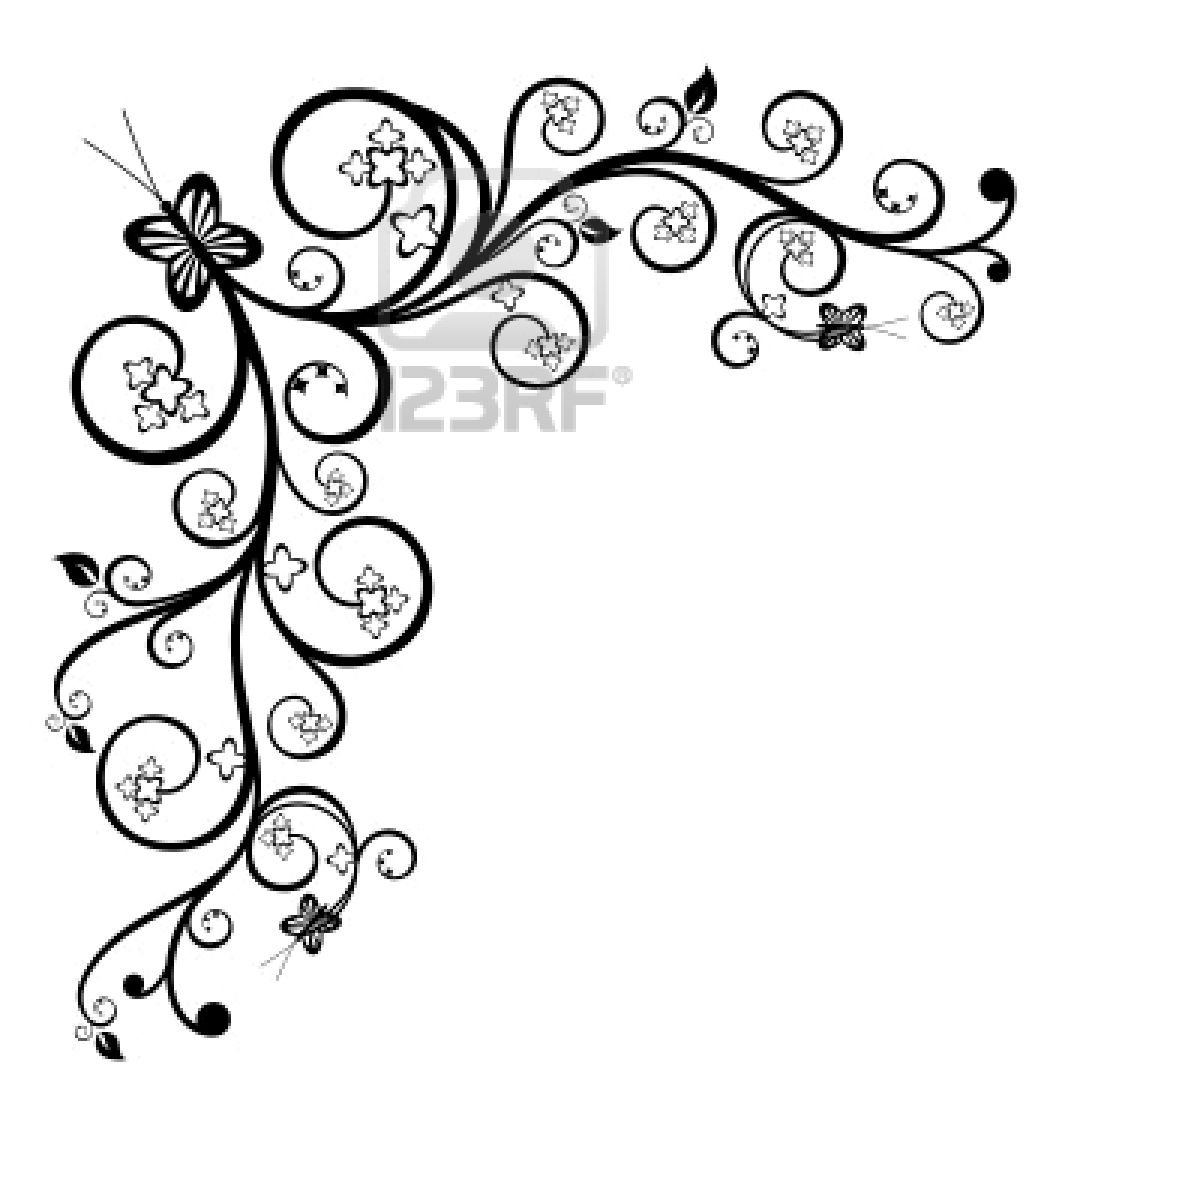 And White Heart Border Clipart Black And White Wallpaper Ever Cool